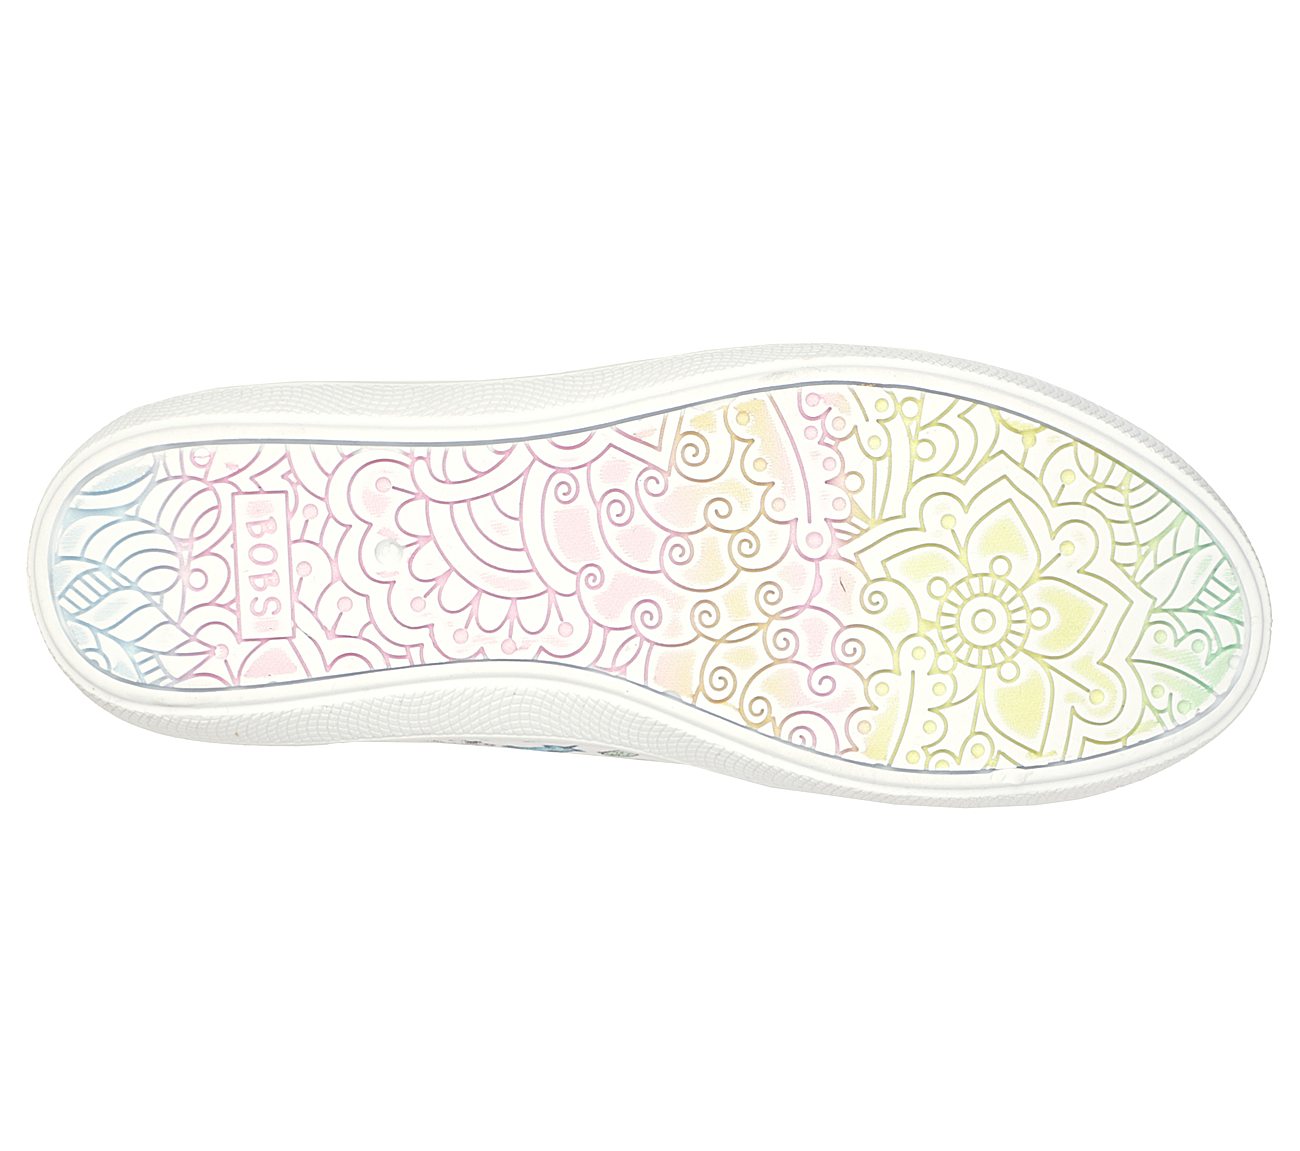 BOBS B CUTE - PASTEL DOODLEZ, White image number null